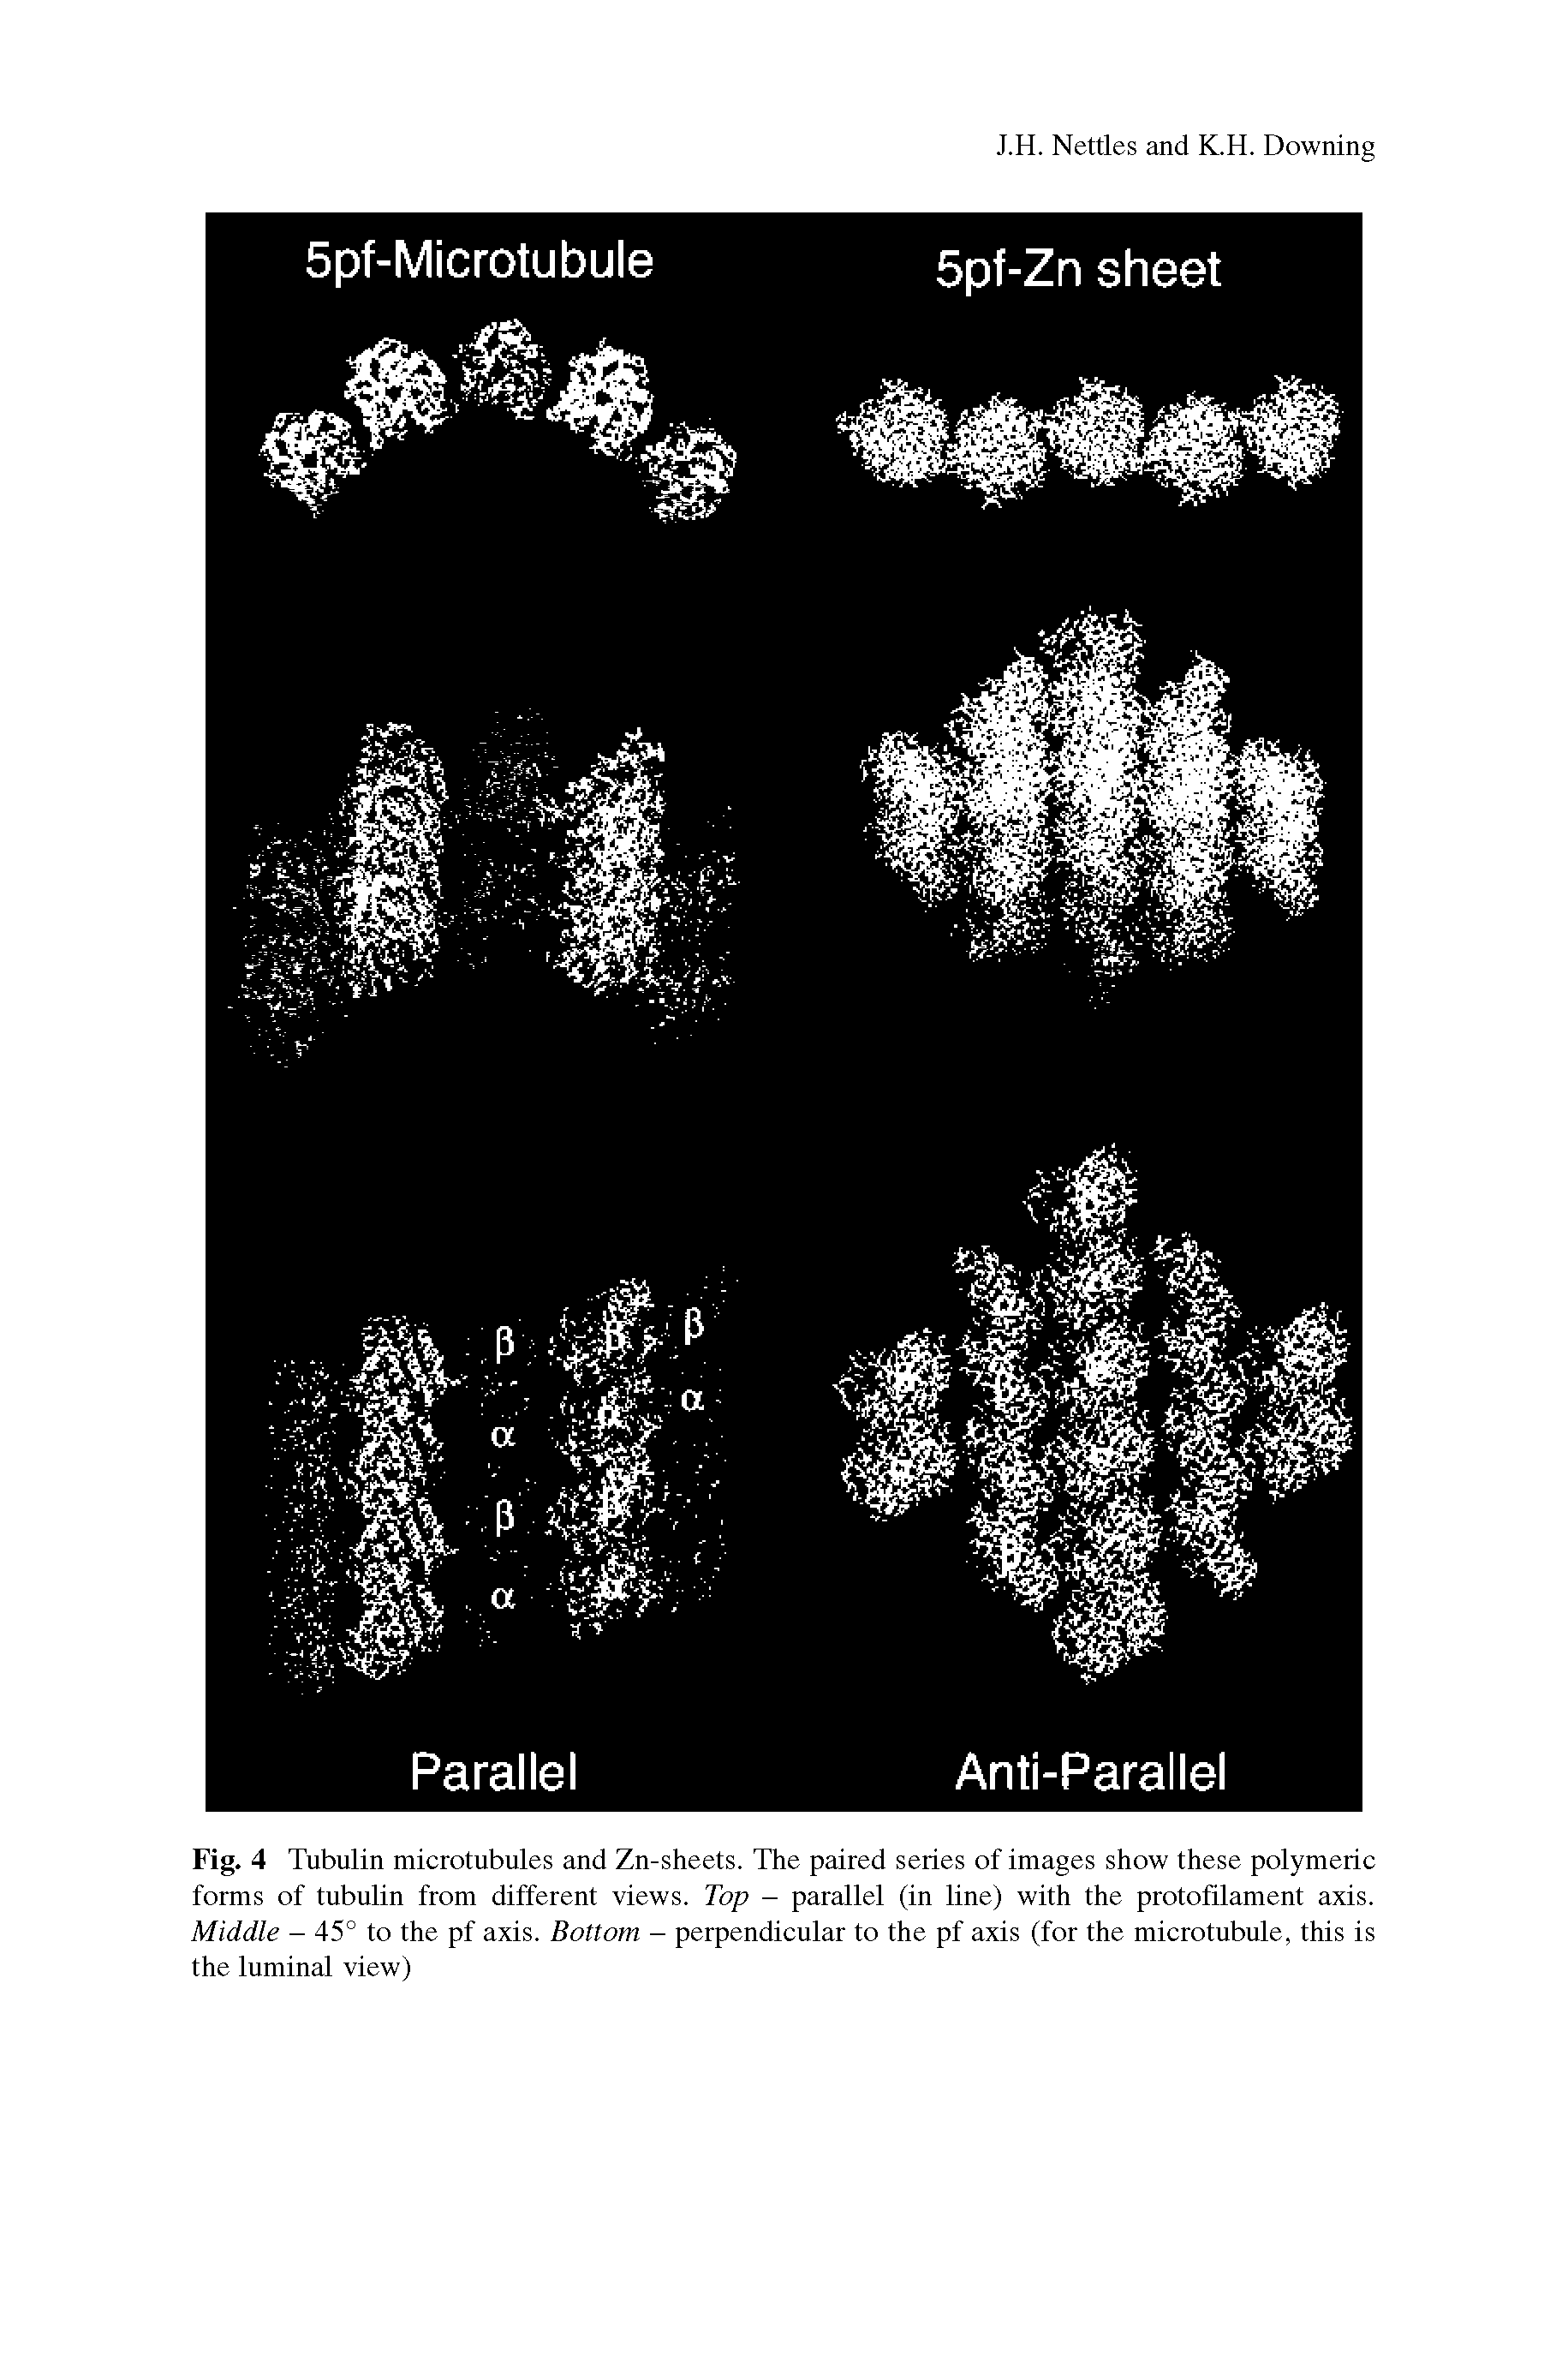 Fig. 4 Tubulin microtubules and Zn-sheets. The paired series of images show these polymeric forms of tubulin from different views. Top - parallel (in line) with the protofilament axis. Middle - 45° to the pf axis. Bottom - perpendicular to the pf axis (for the microtubule, this is the luminal view)...